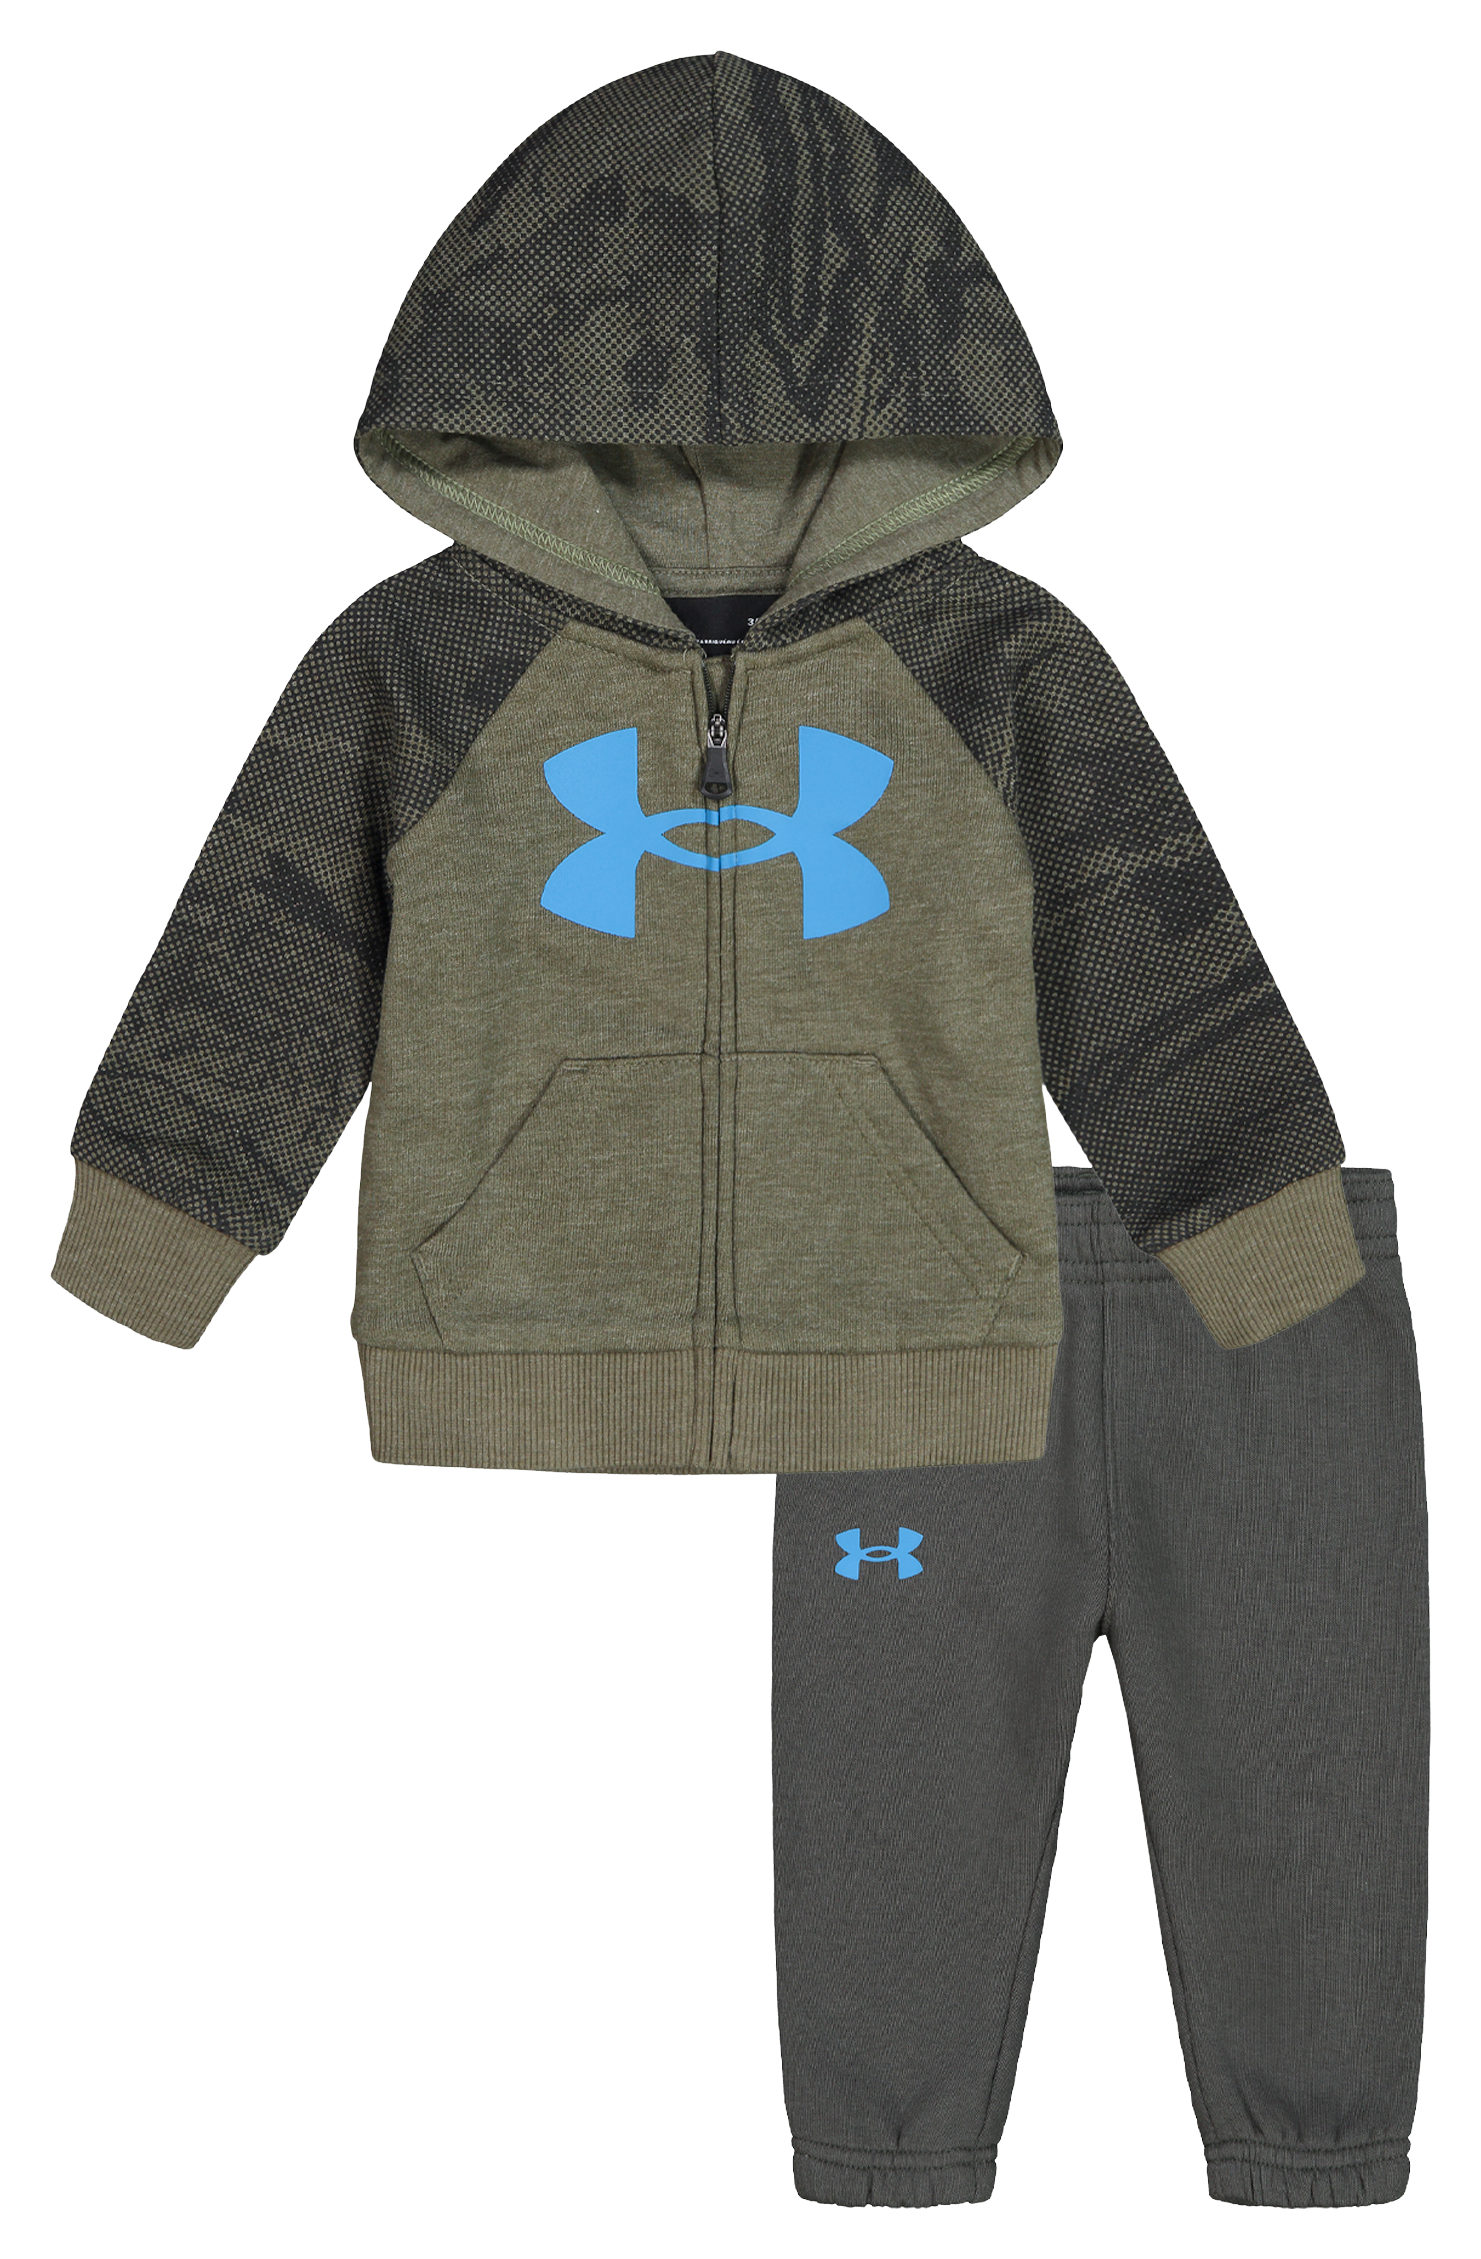 Under Amour Half Tone Reaper Colorblock Long Sleeve Hoodie and Jogger Set for Babies Marine OD Green 3 6 Months